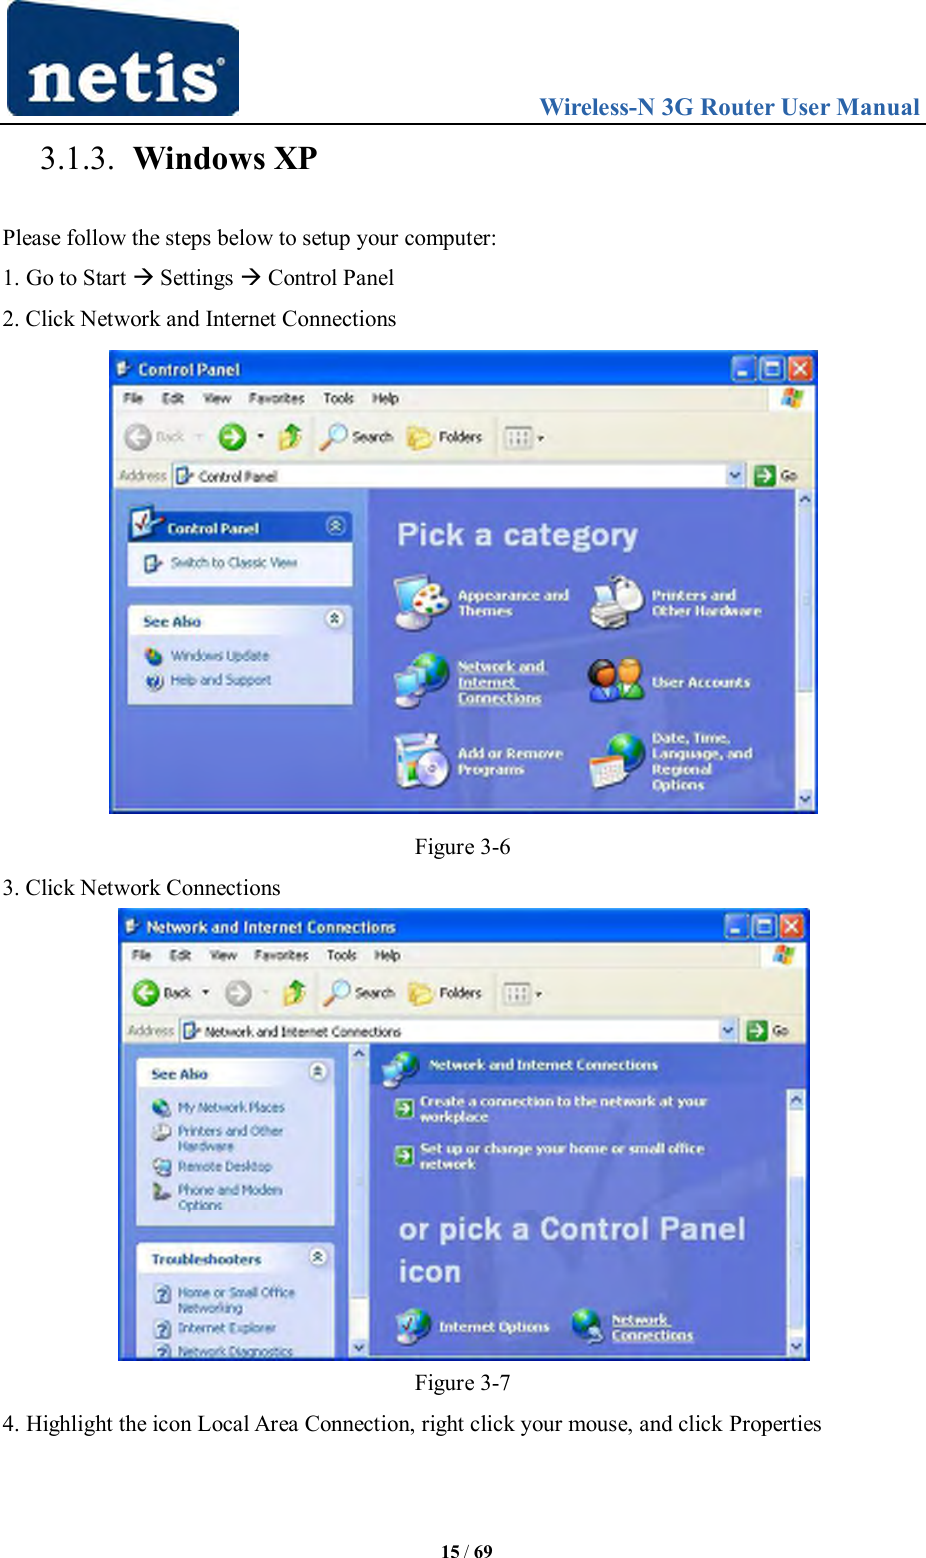                                 Wireless-N 3G Router User Manual  15 / 69 3.1.3. Windows XP Please follow the steps below to setup your computer: 1. Go to Start  Settings  Control Panel 2. Click Network and Internet Connections  Figure 3-6 3. Click Network Connections  Figure 3-7 4. Highlight the icon Local Area Connection, right click your mouse, and click Properties 